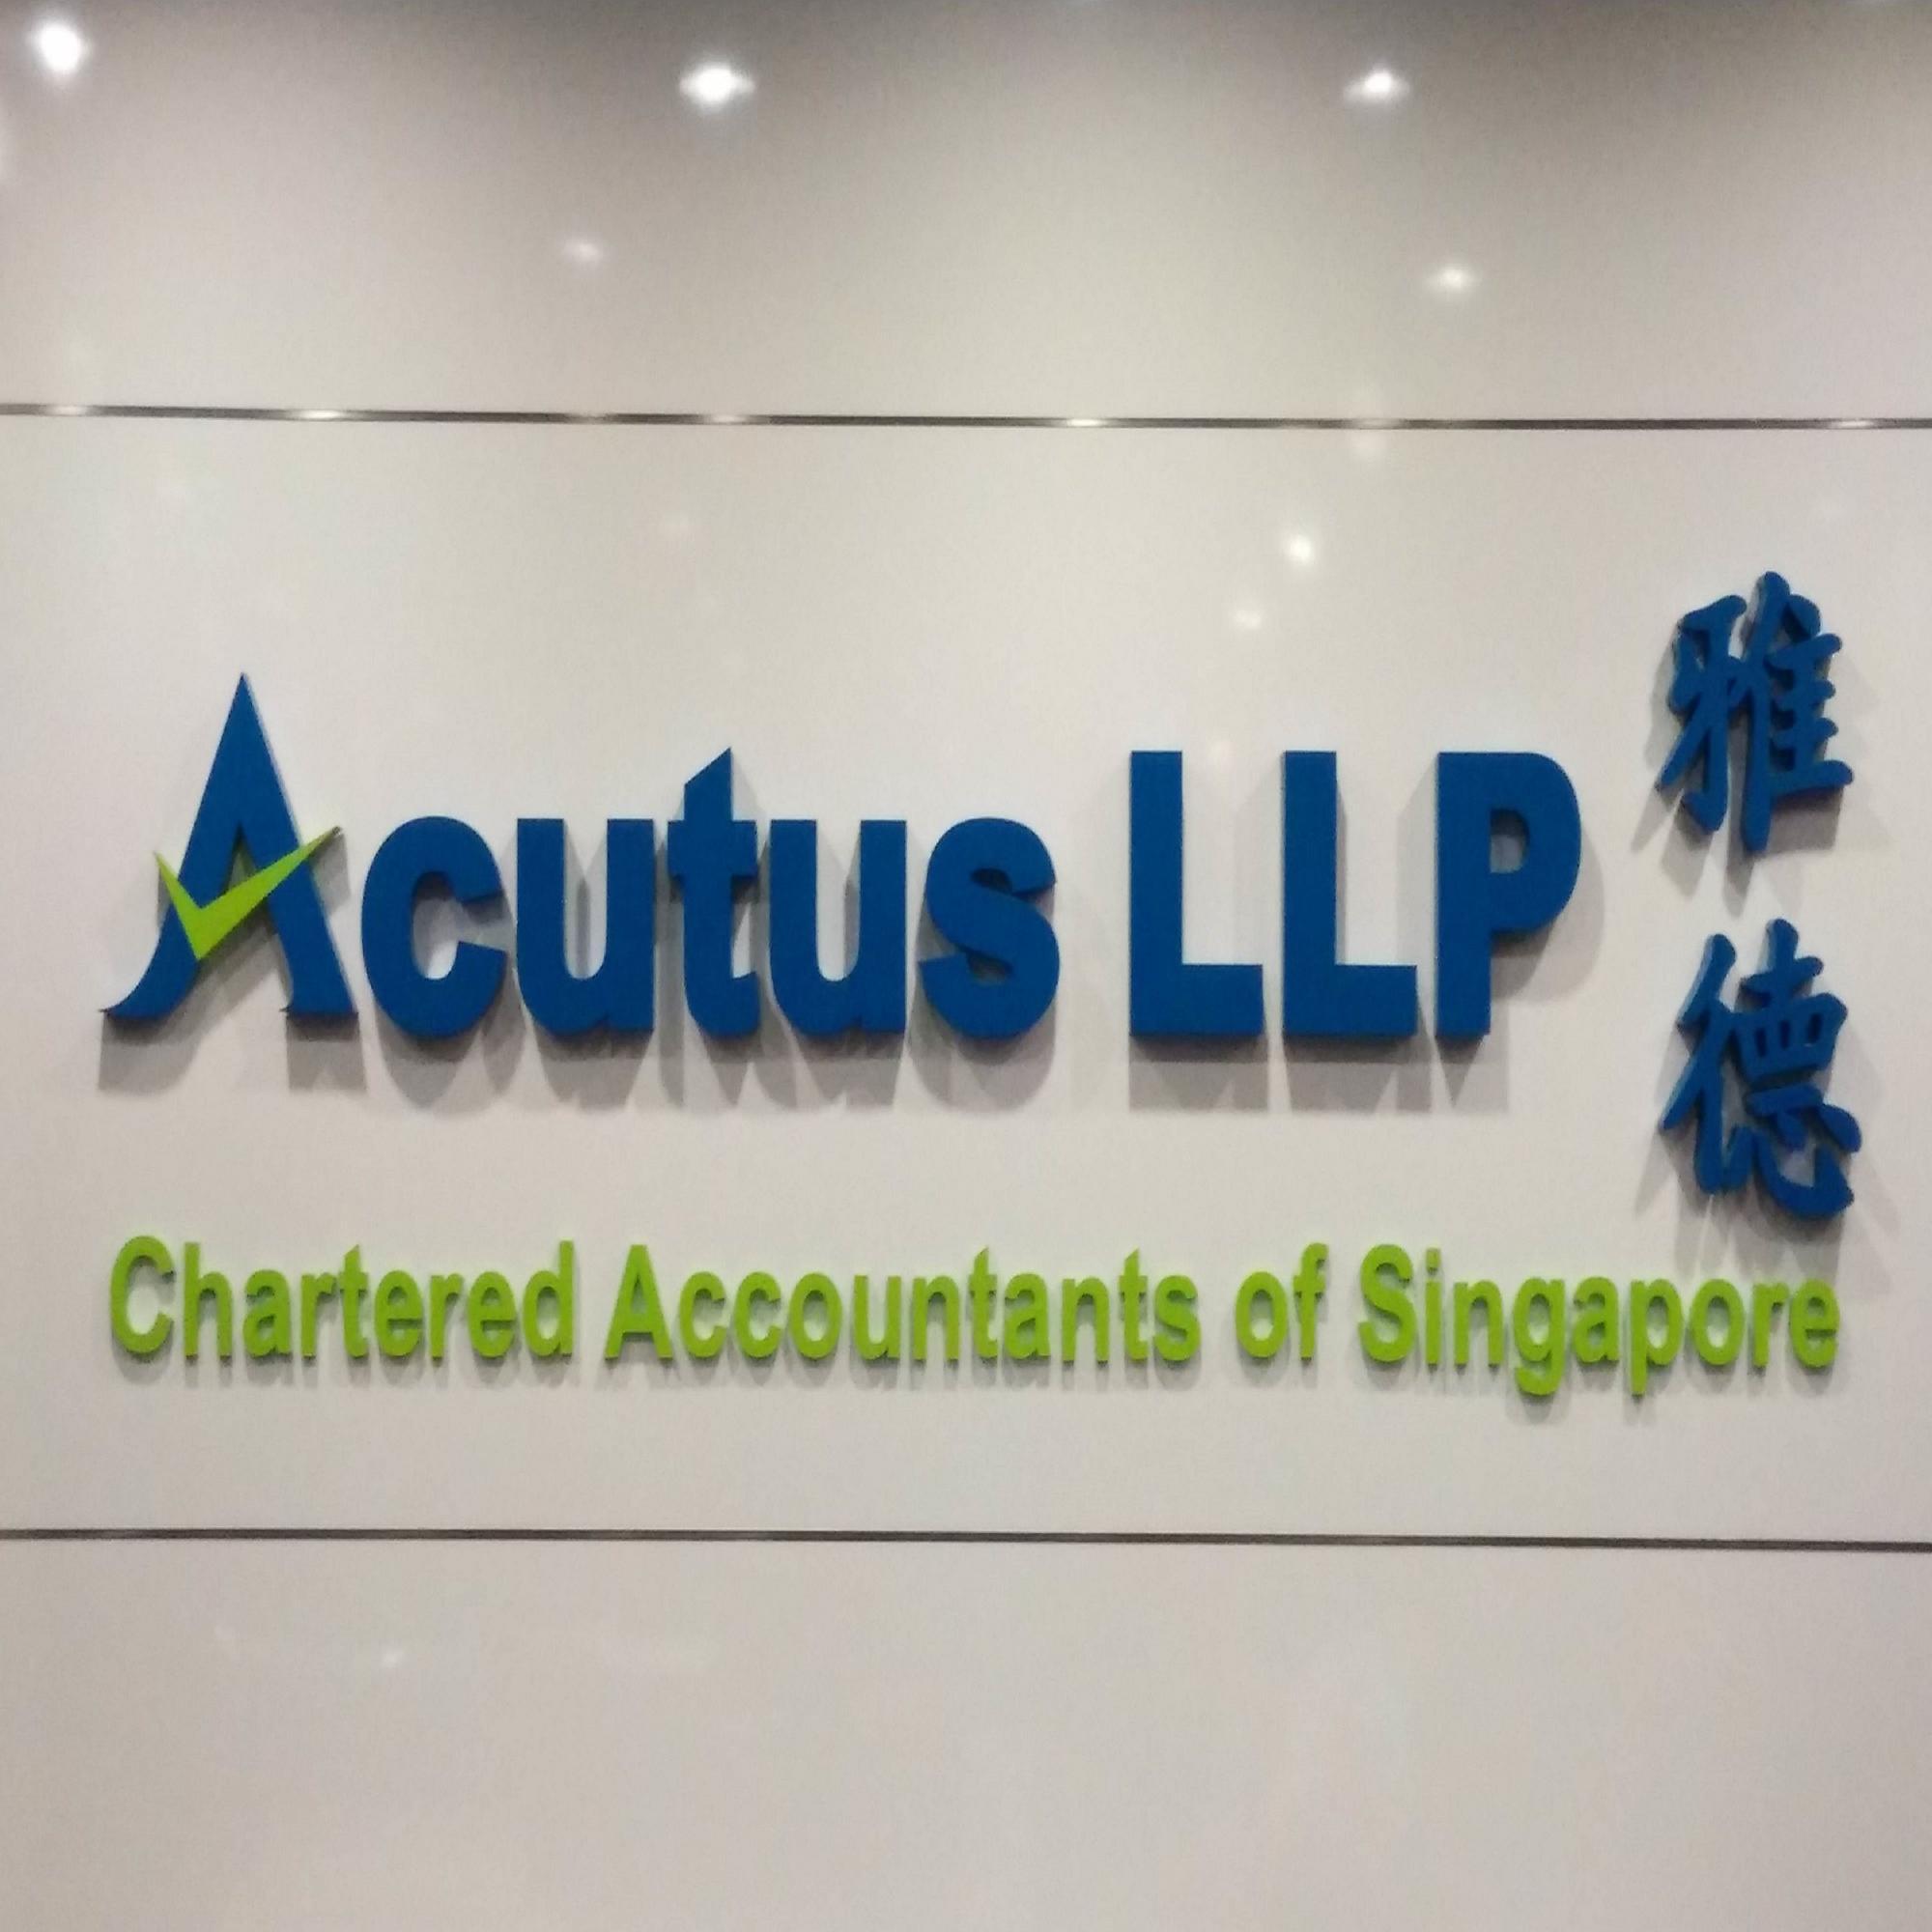 Official Twitter account of Acutus LLP, a Singapore based firm of Chartered Accountants with offices in Hong Kong & Malaysia.